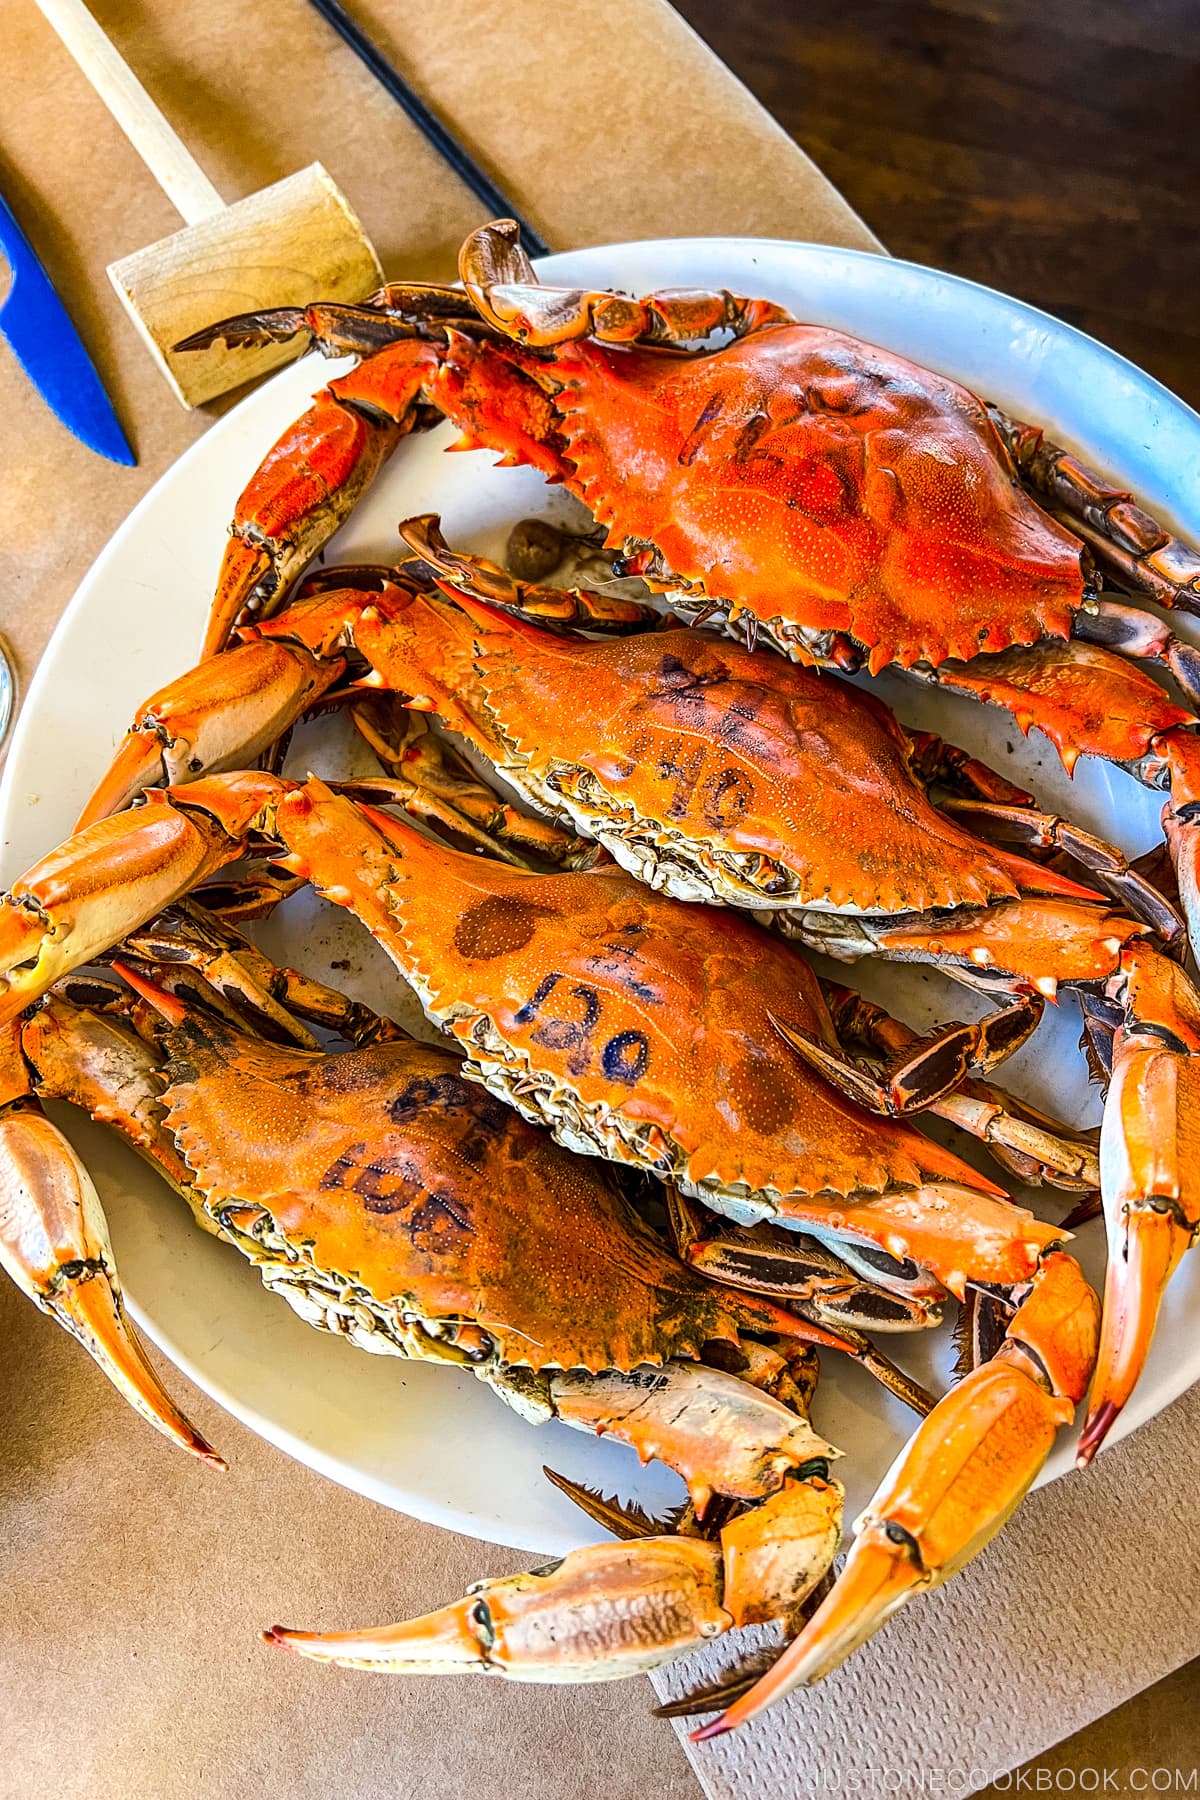 four Maryland blue crabs on a plate